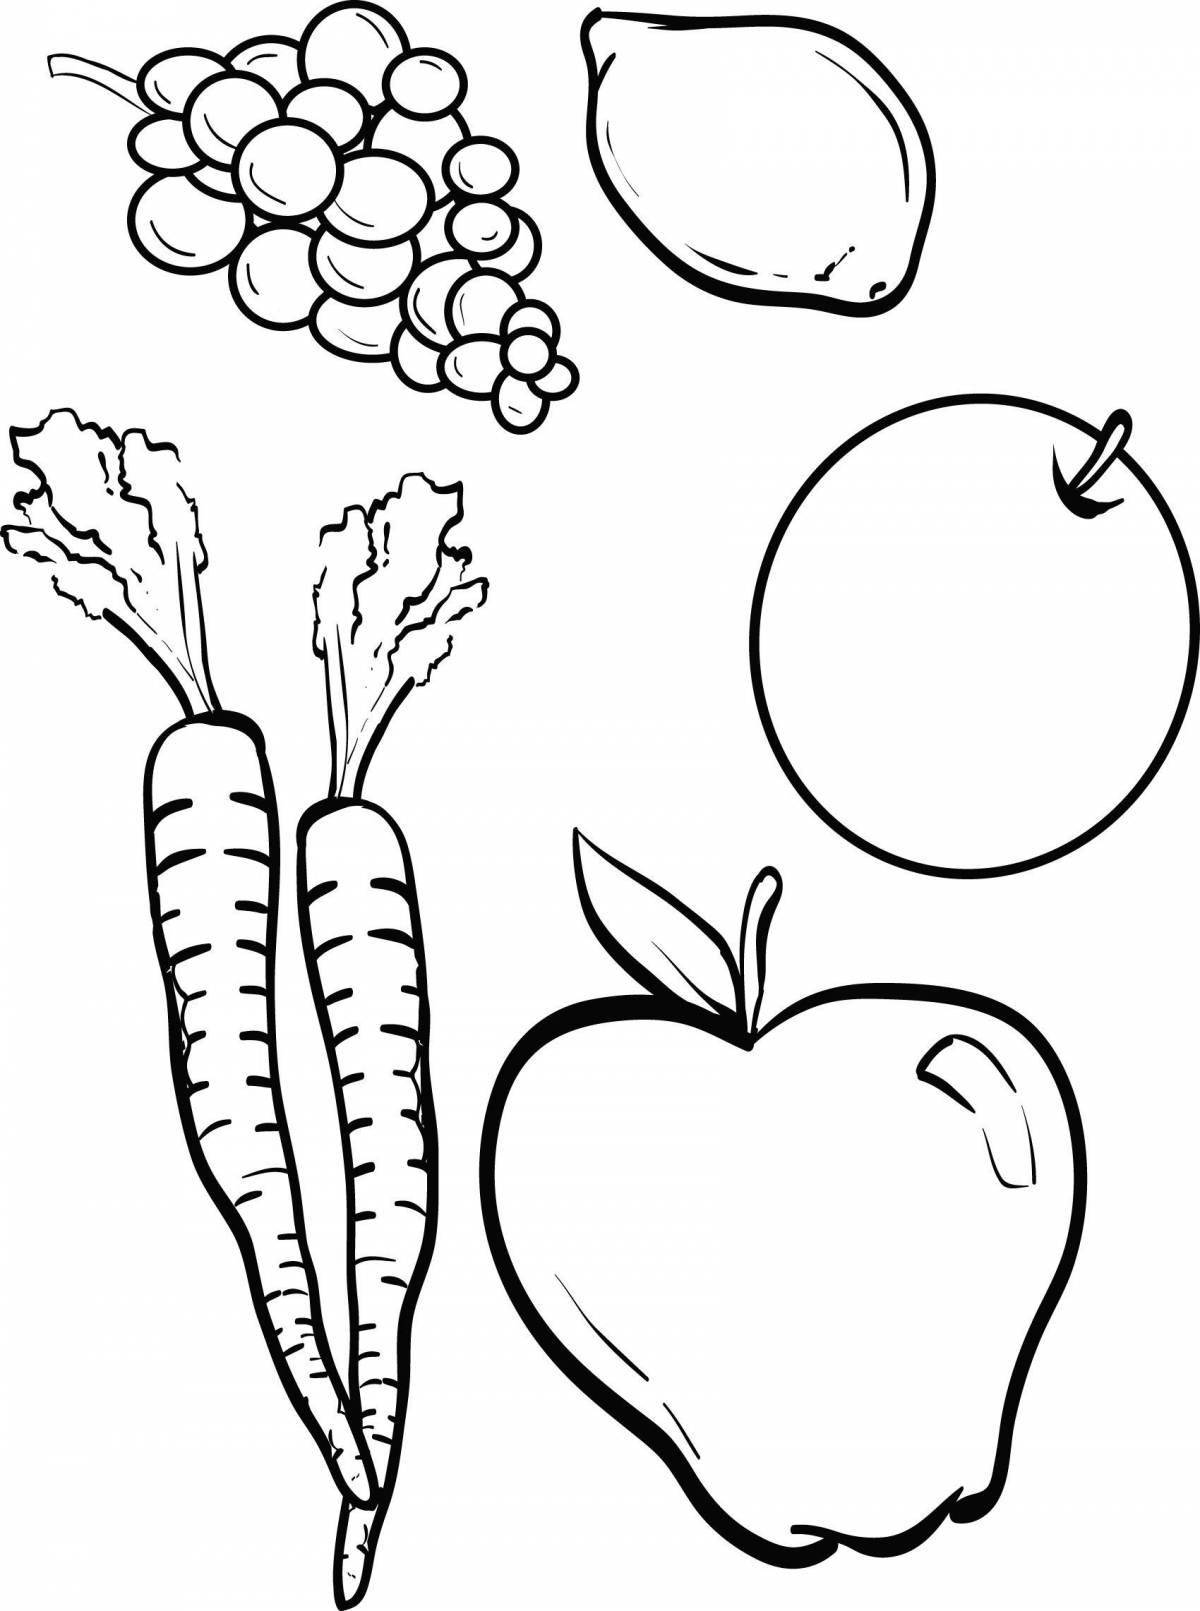 Fun vegetable coloring book for 5-6 year olds